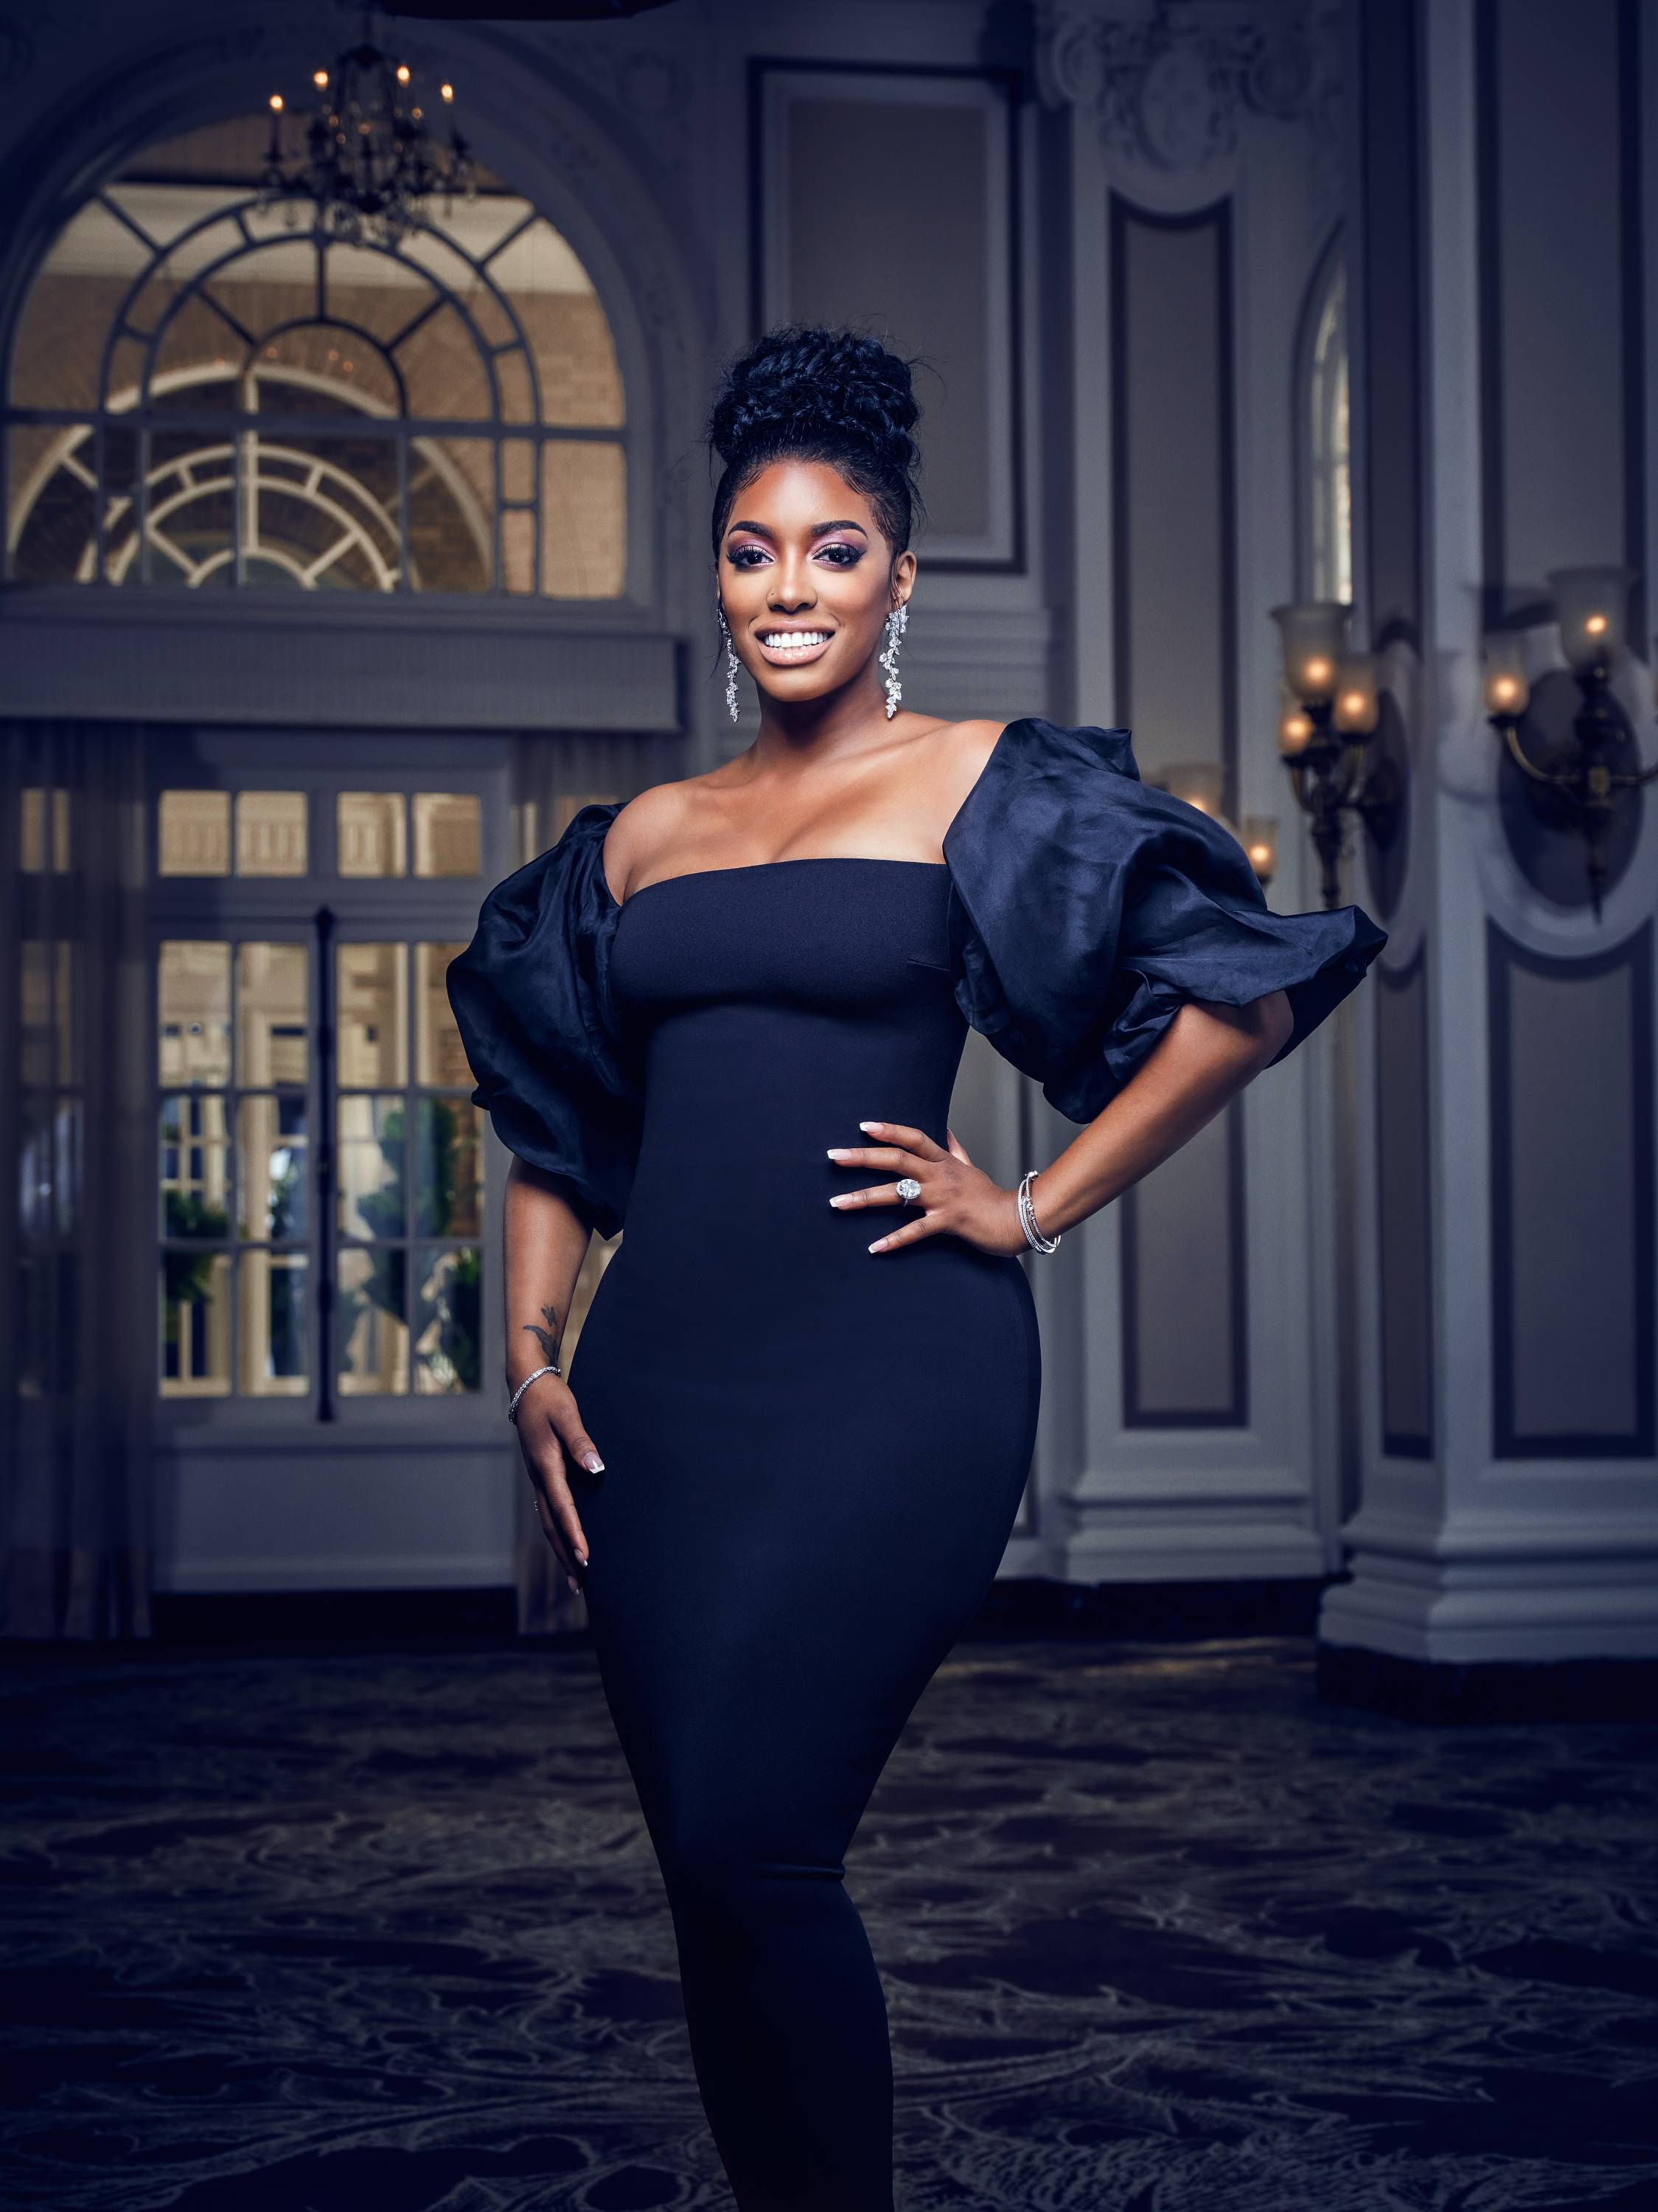 THE REAL HOUSEWIVES OF ATLANTA -- Season:12 -- Pictured: Porsha Williams -- (Photo by: Tommy Garcia/Bravo/NBCU Photo Bank)